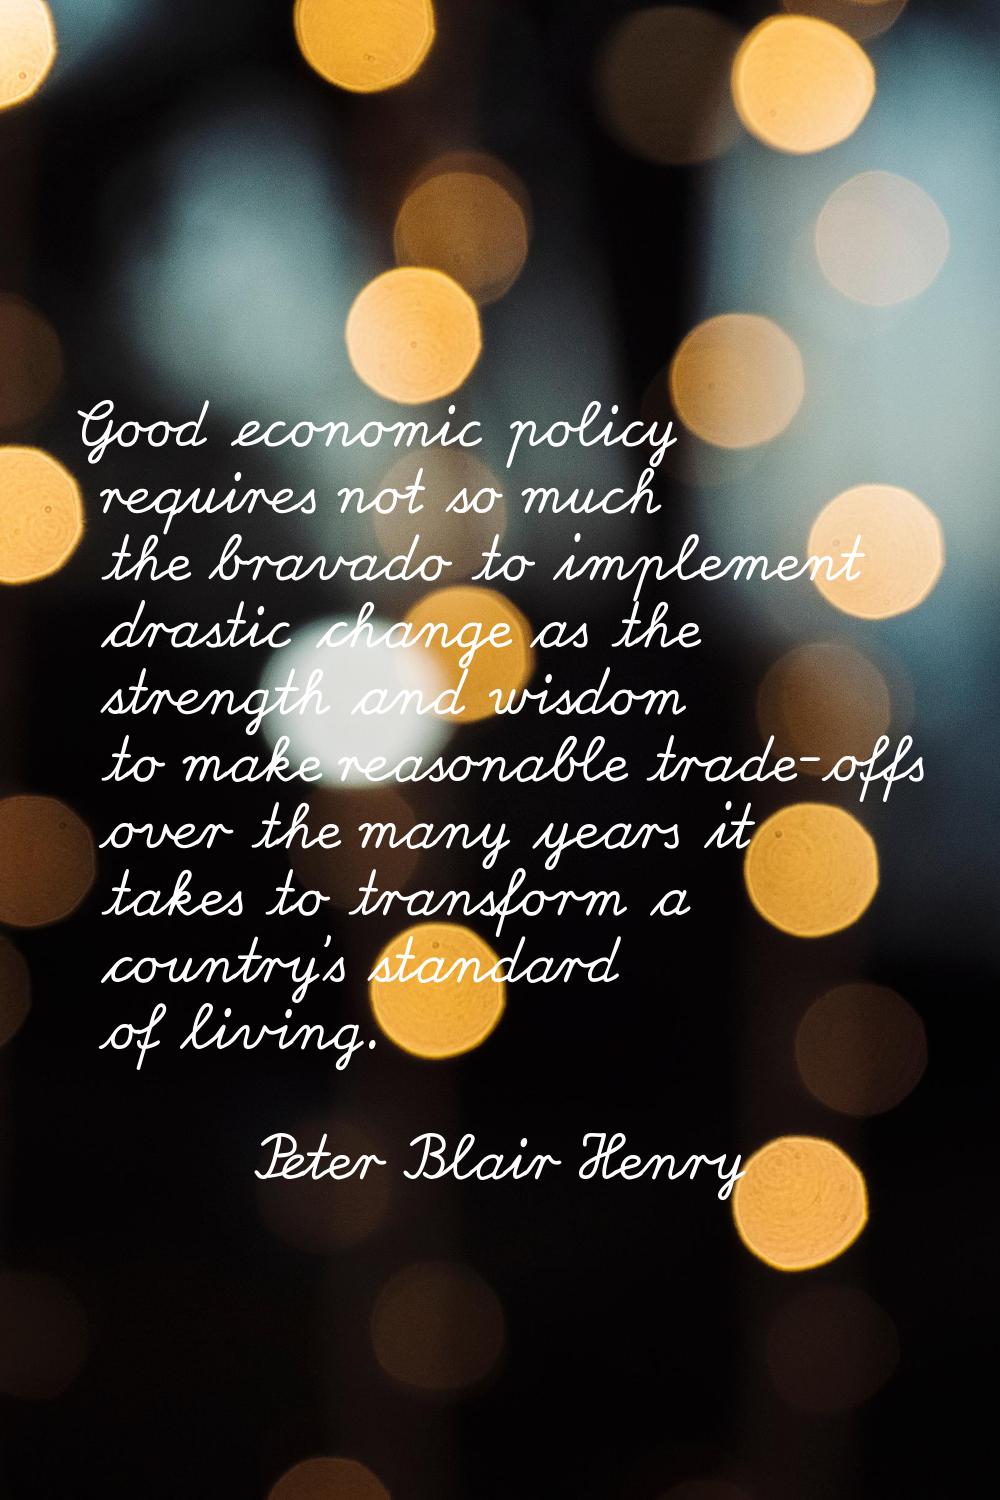 Good economic policy requires not so much the bravado to implement drastic change as the strength a